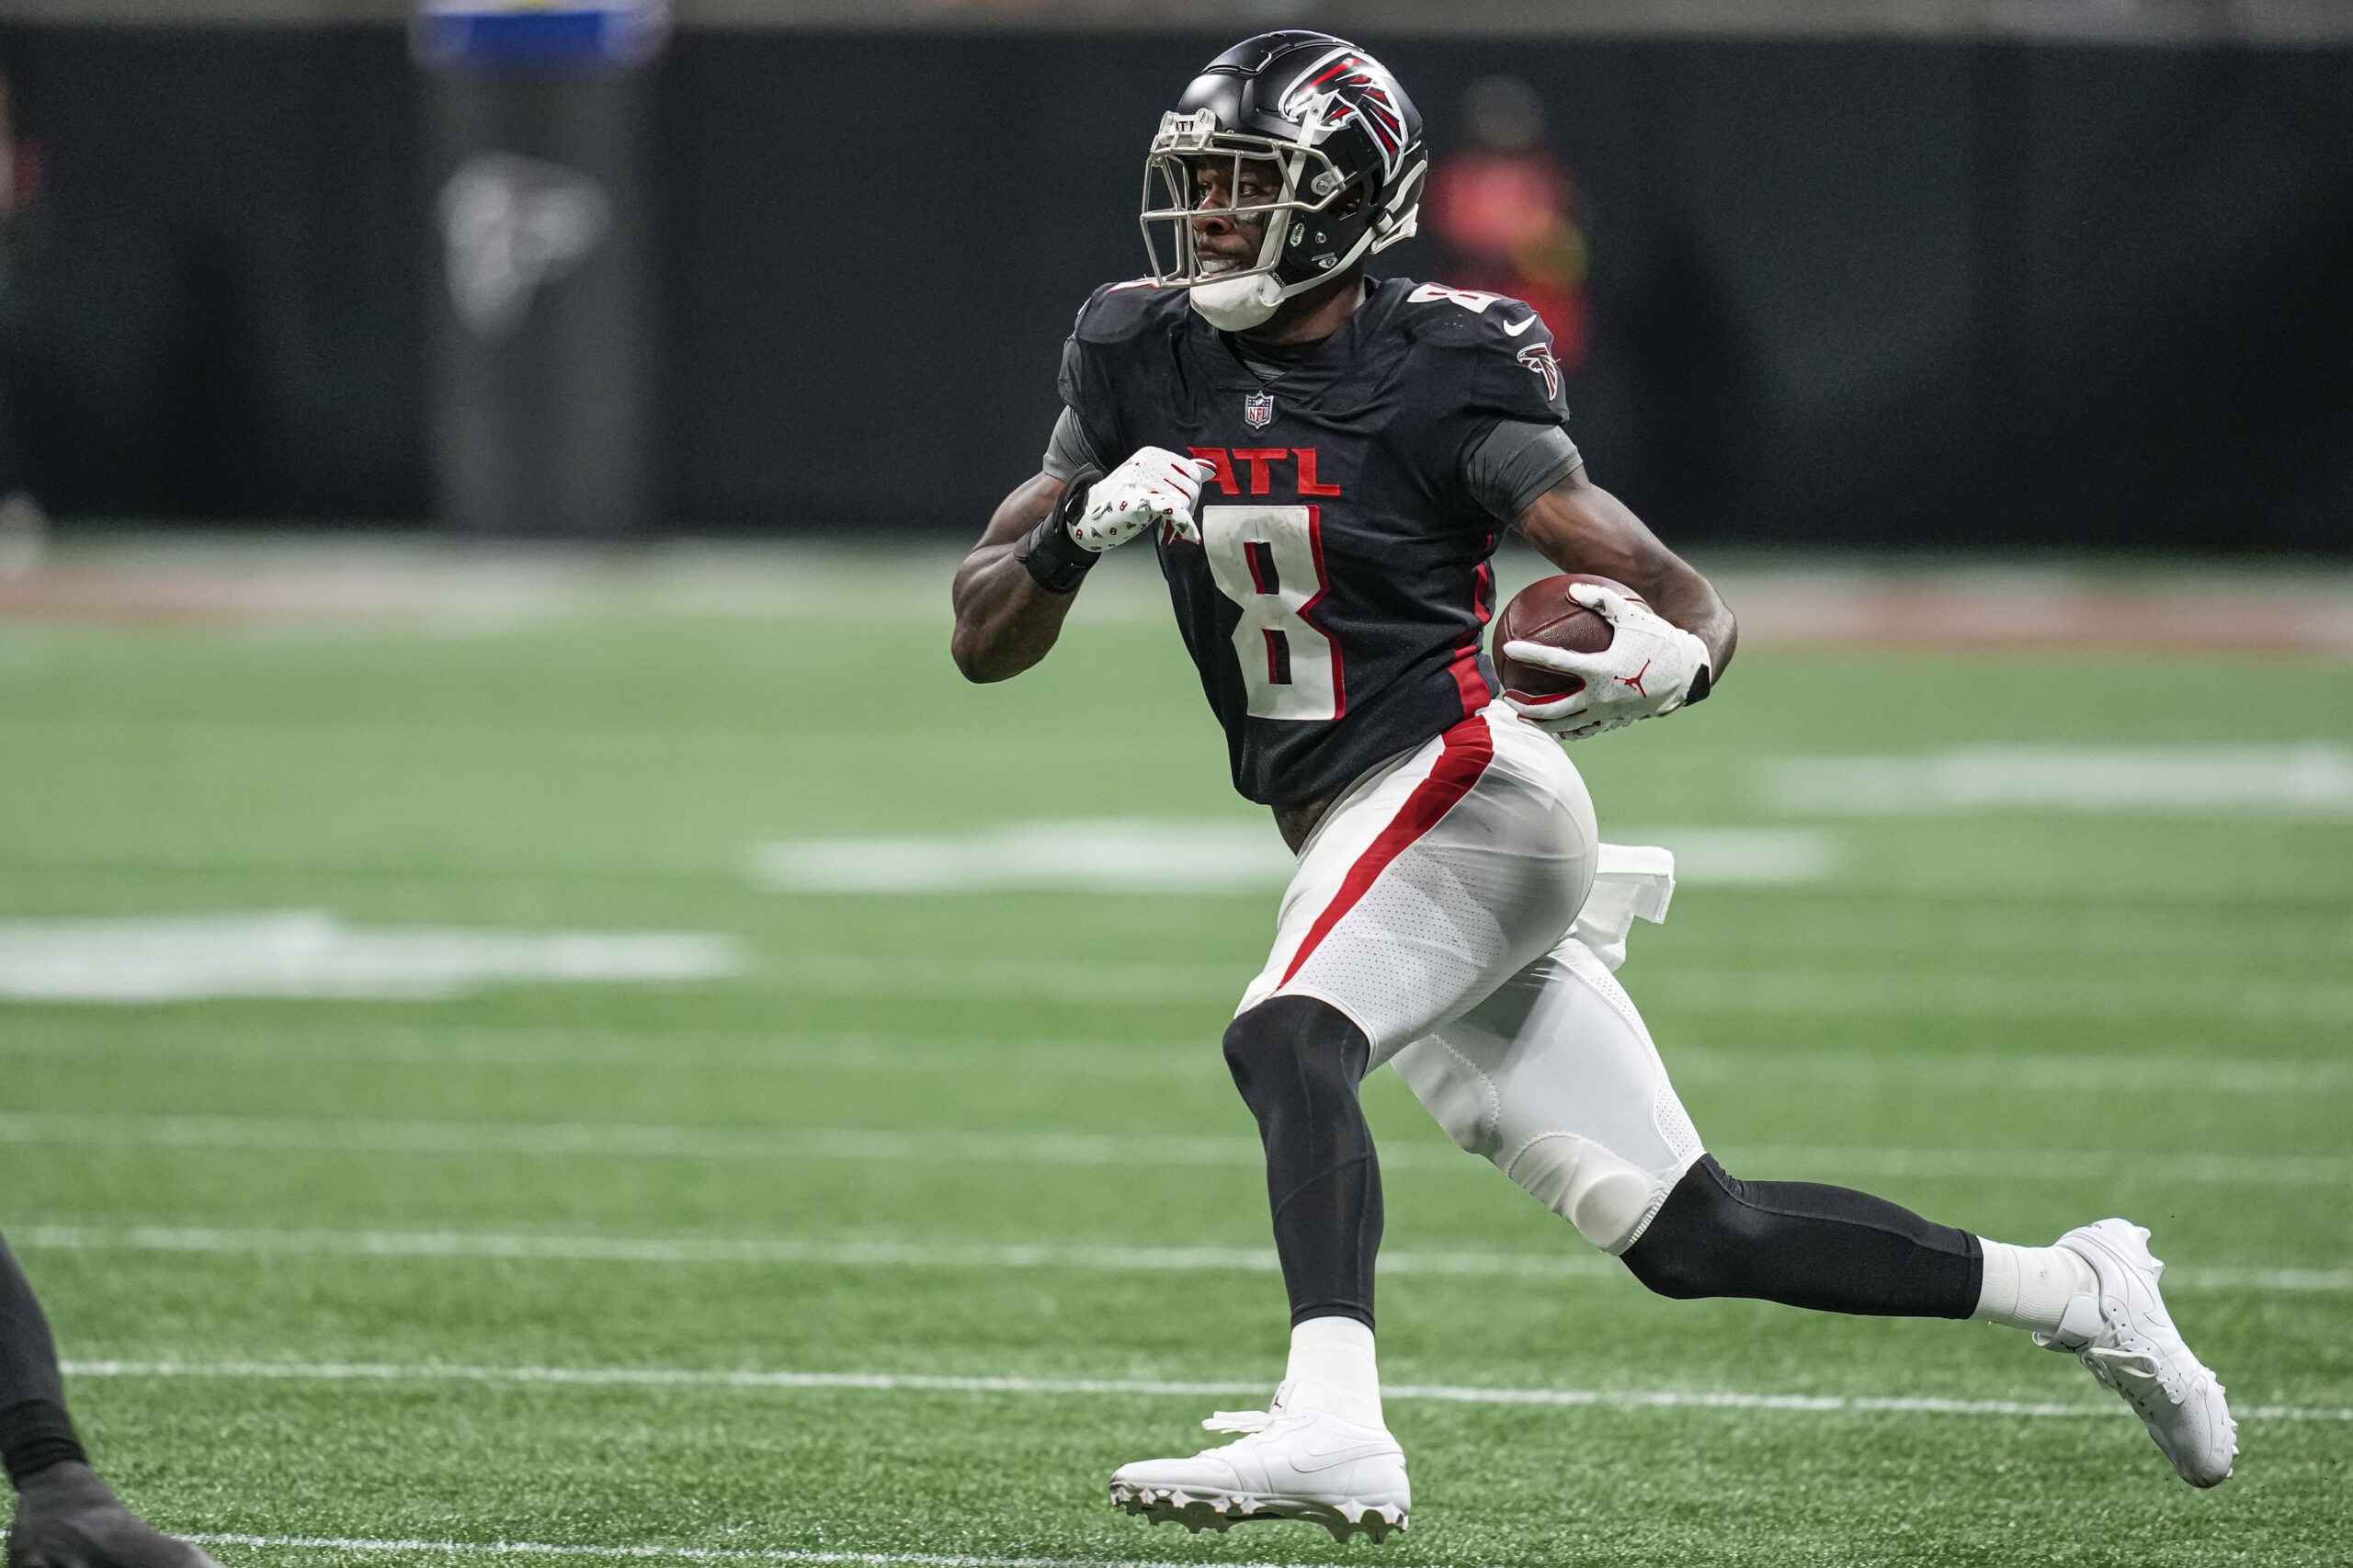 Buy Low: Kyle Pitts and Darren Waller Look to Rebound This Season!